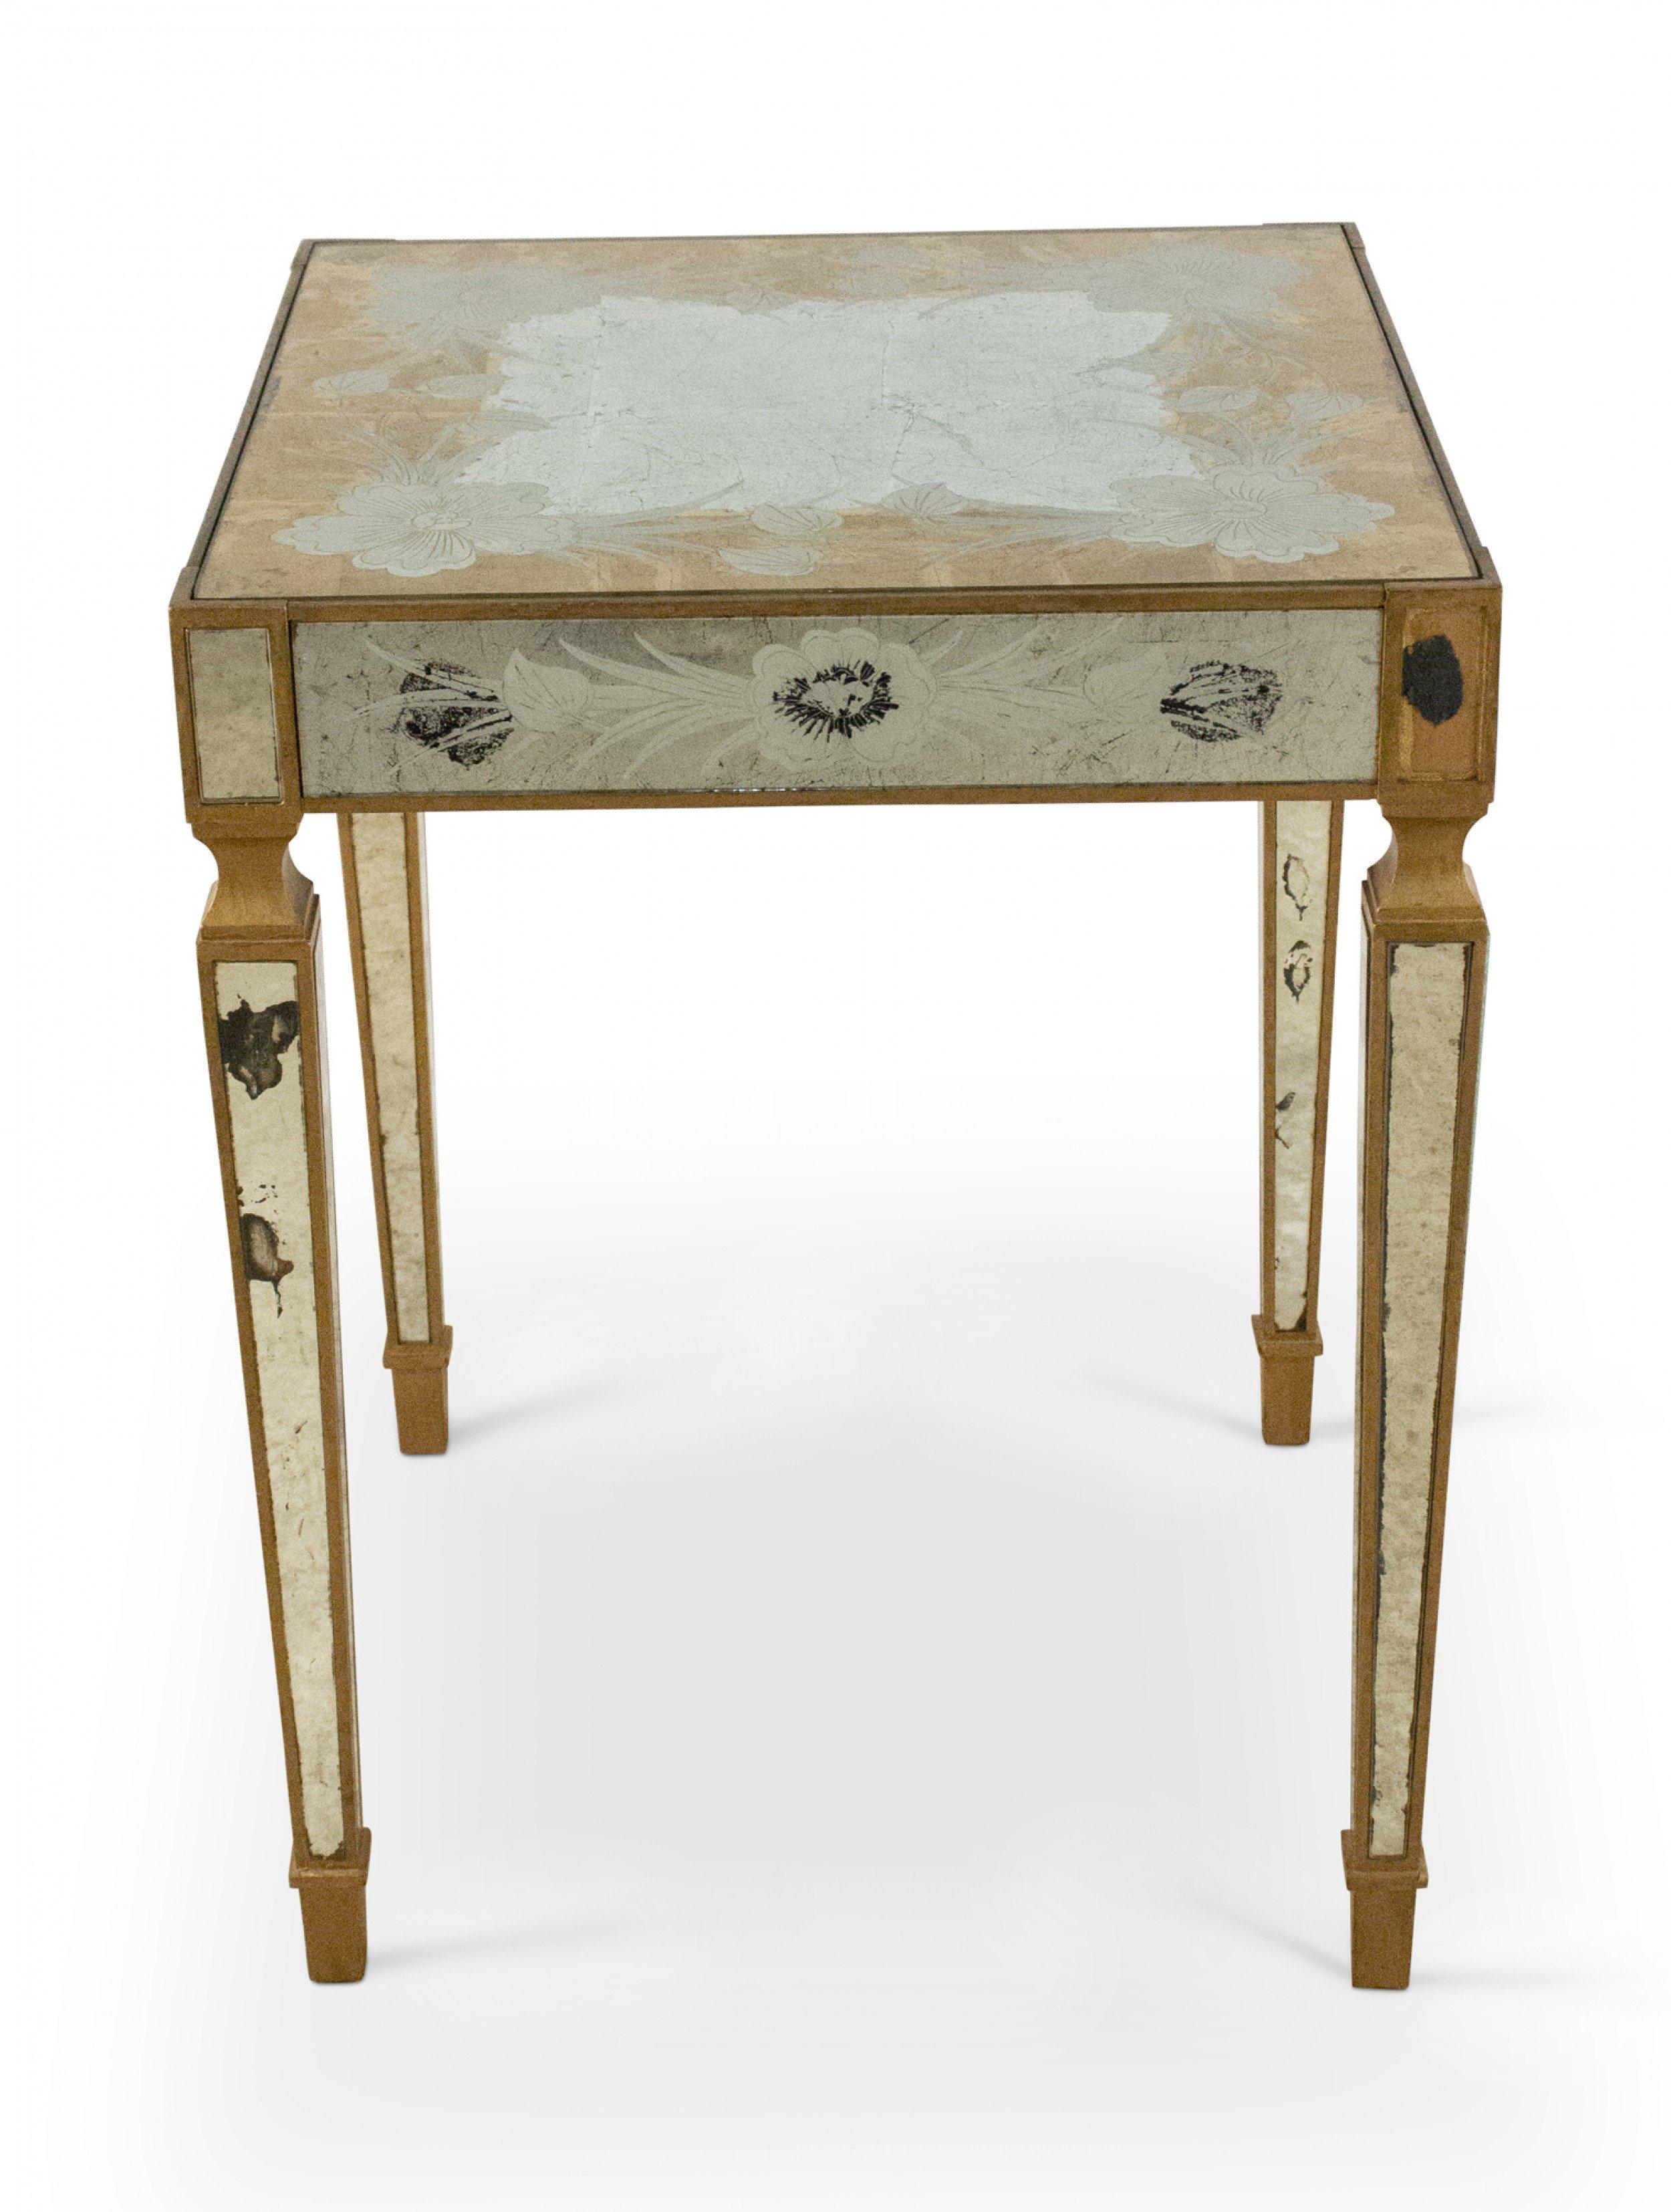 French mid-century square side / end table with églomisé mirrored top and apron with giltwood trim and antique mirrored legs.